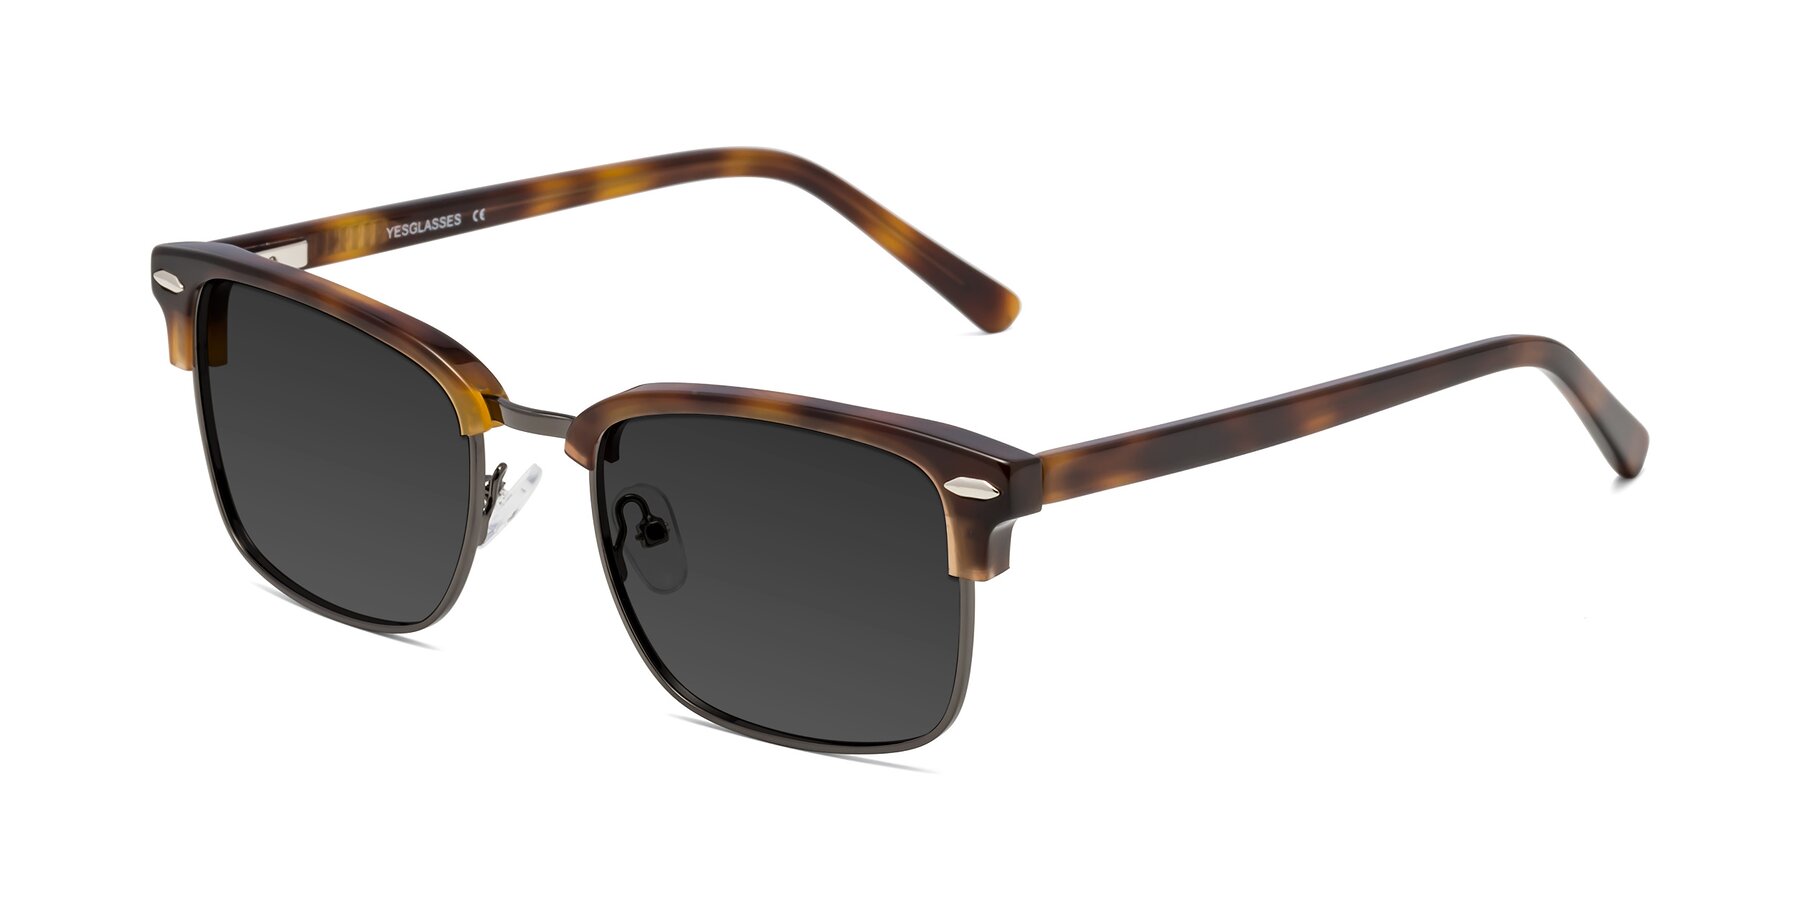 Angle of 17464 in Tortoise/ Gunmetal with Gray Tinted Lenses